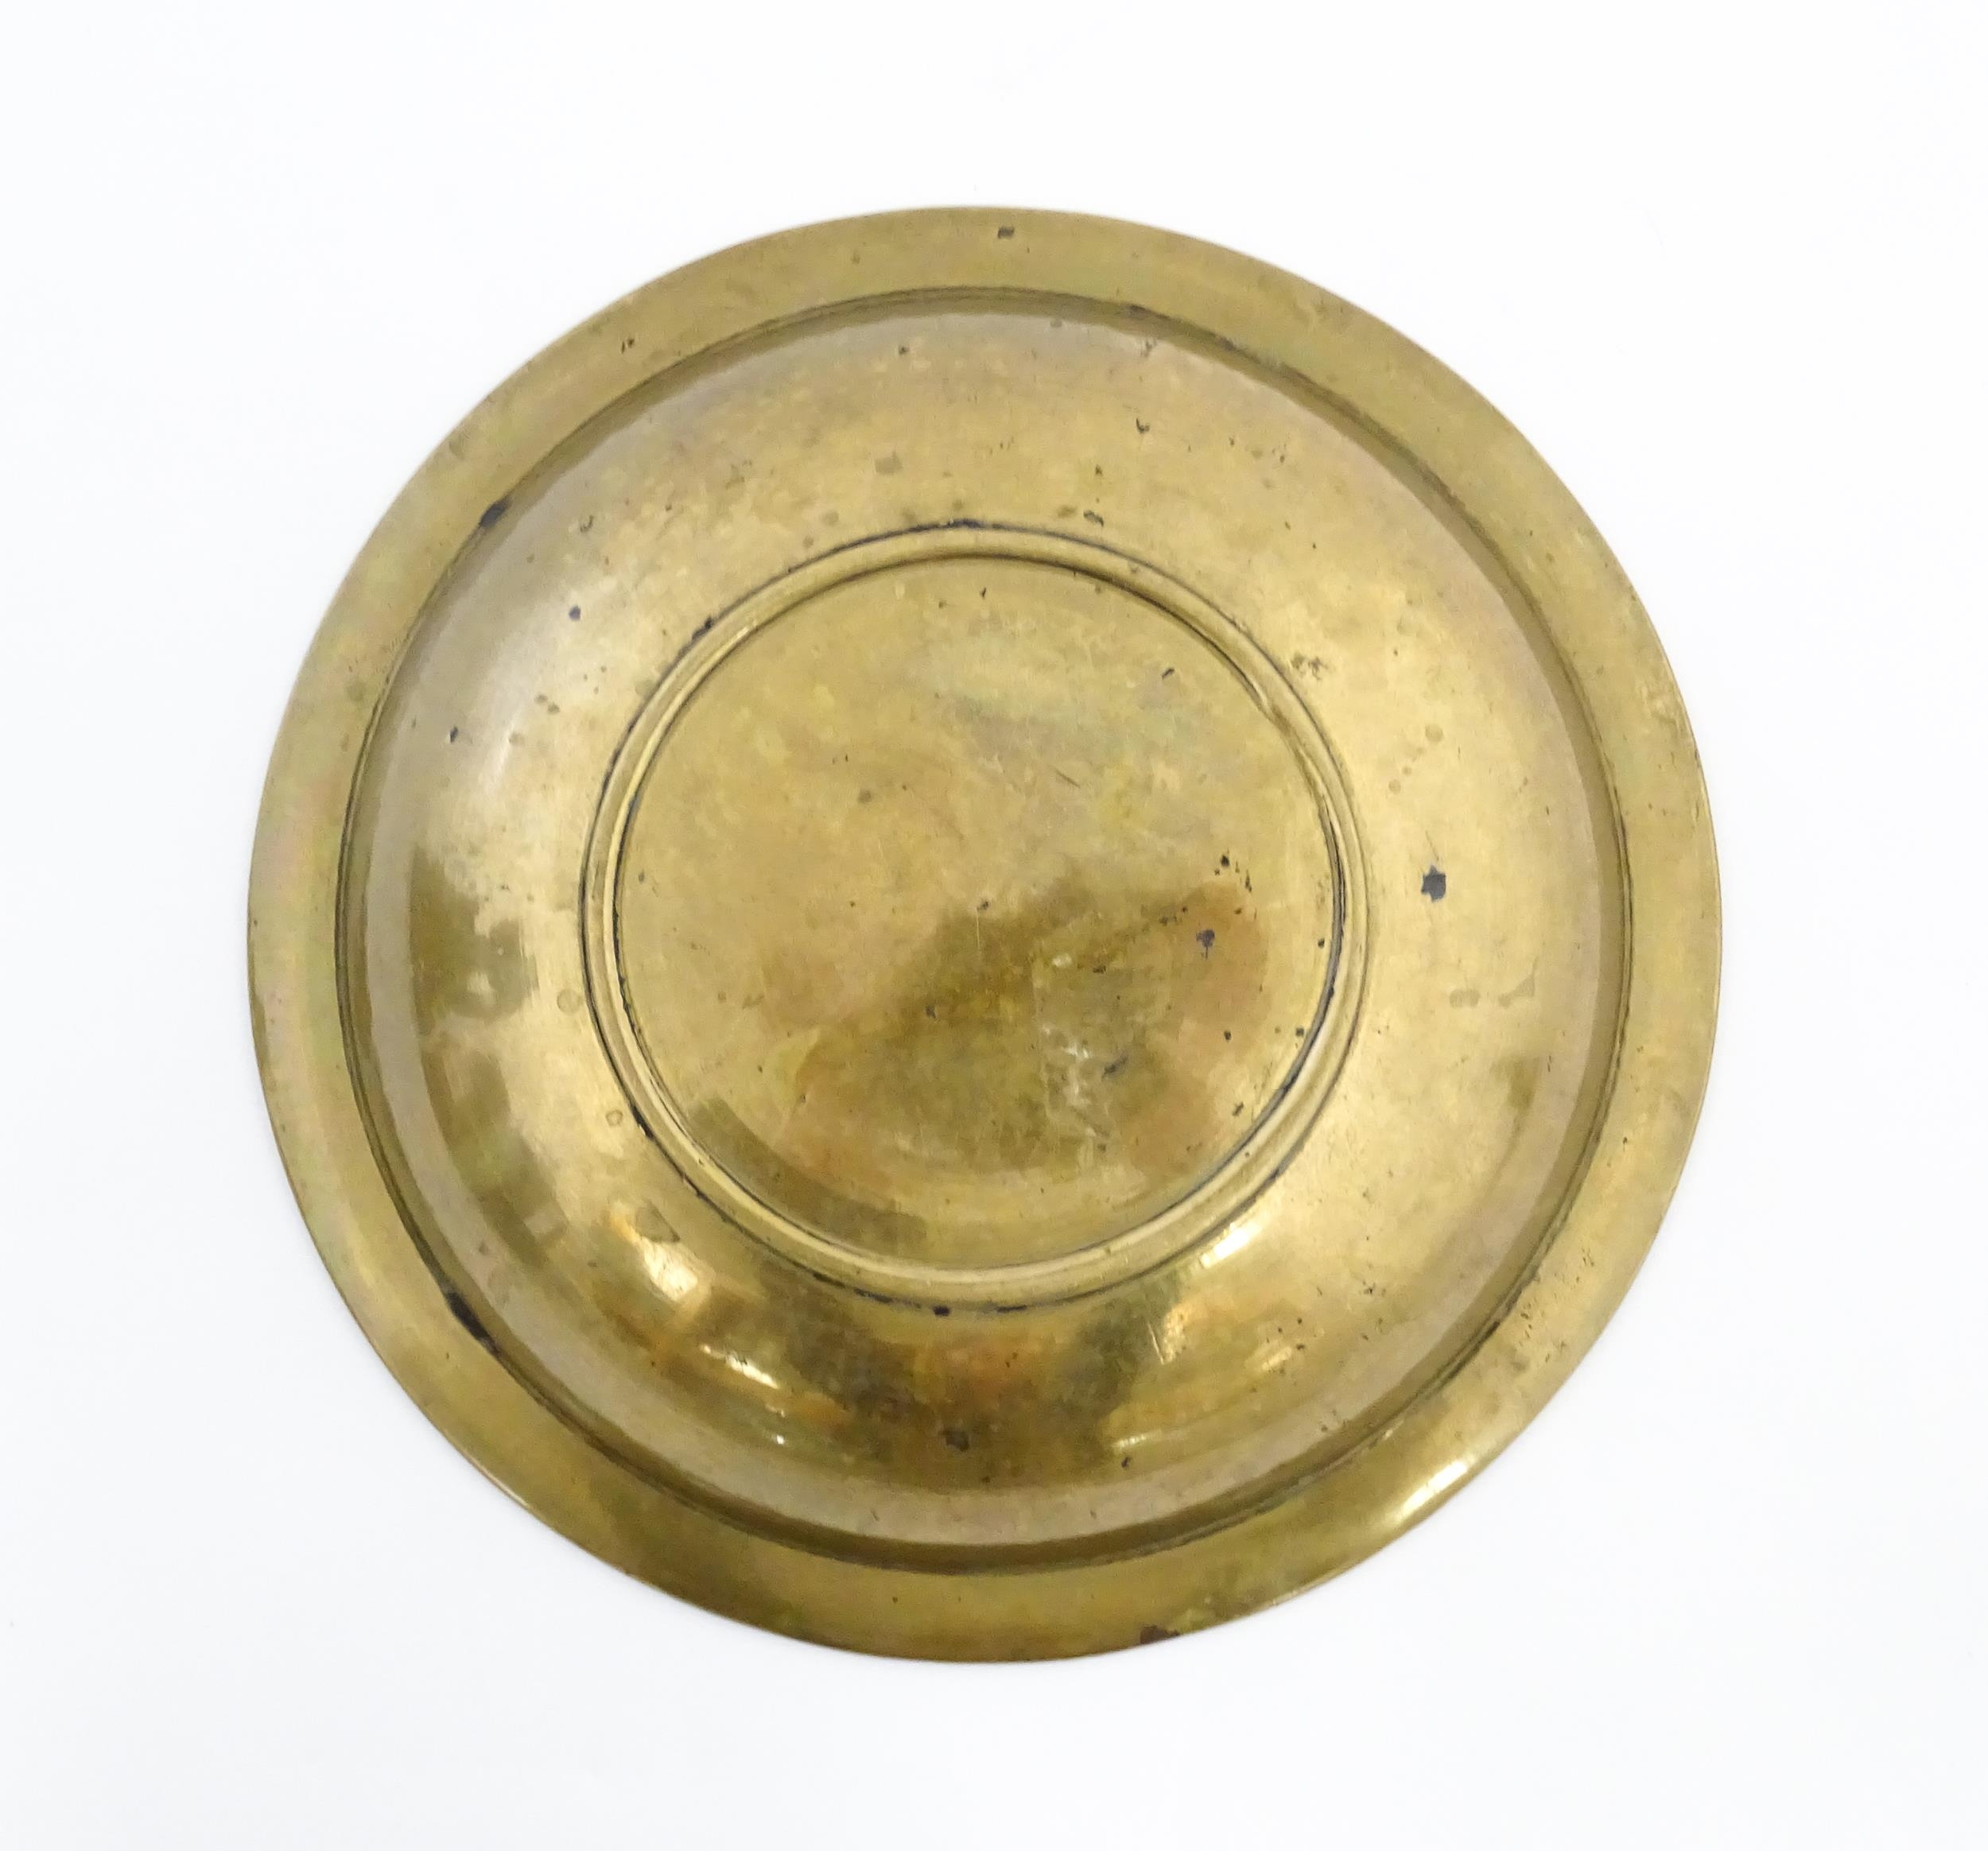 A Middle Eastern brass dish / bowl with incised detail and inlaid white metal and copper - Image 2 of 8